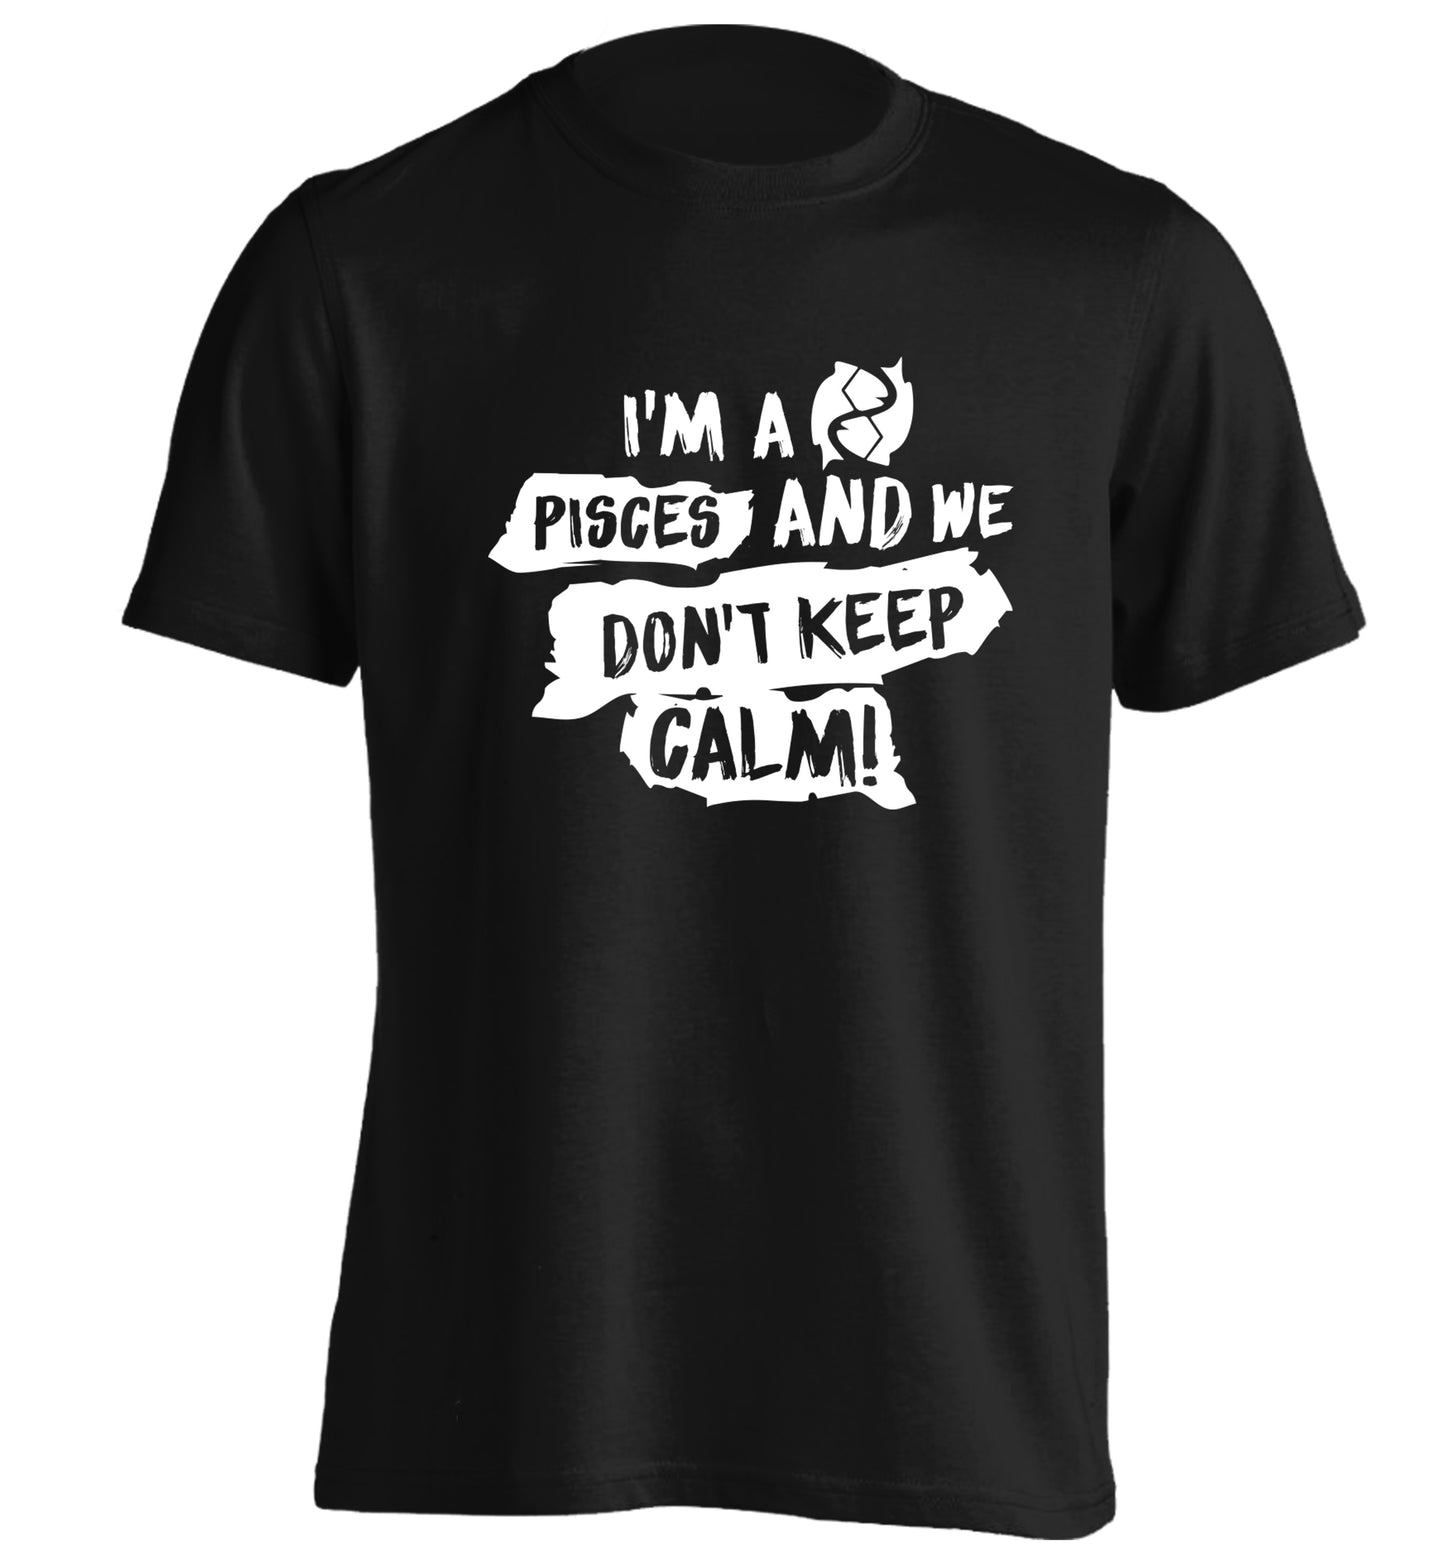 I'm a pisces and we don't keep calm adults unisex black Tshirt 2XL